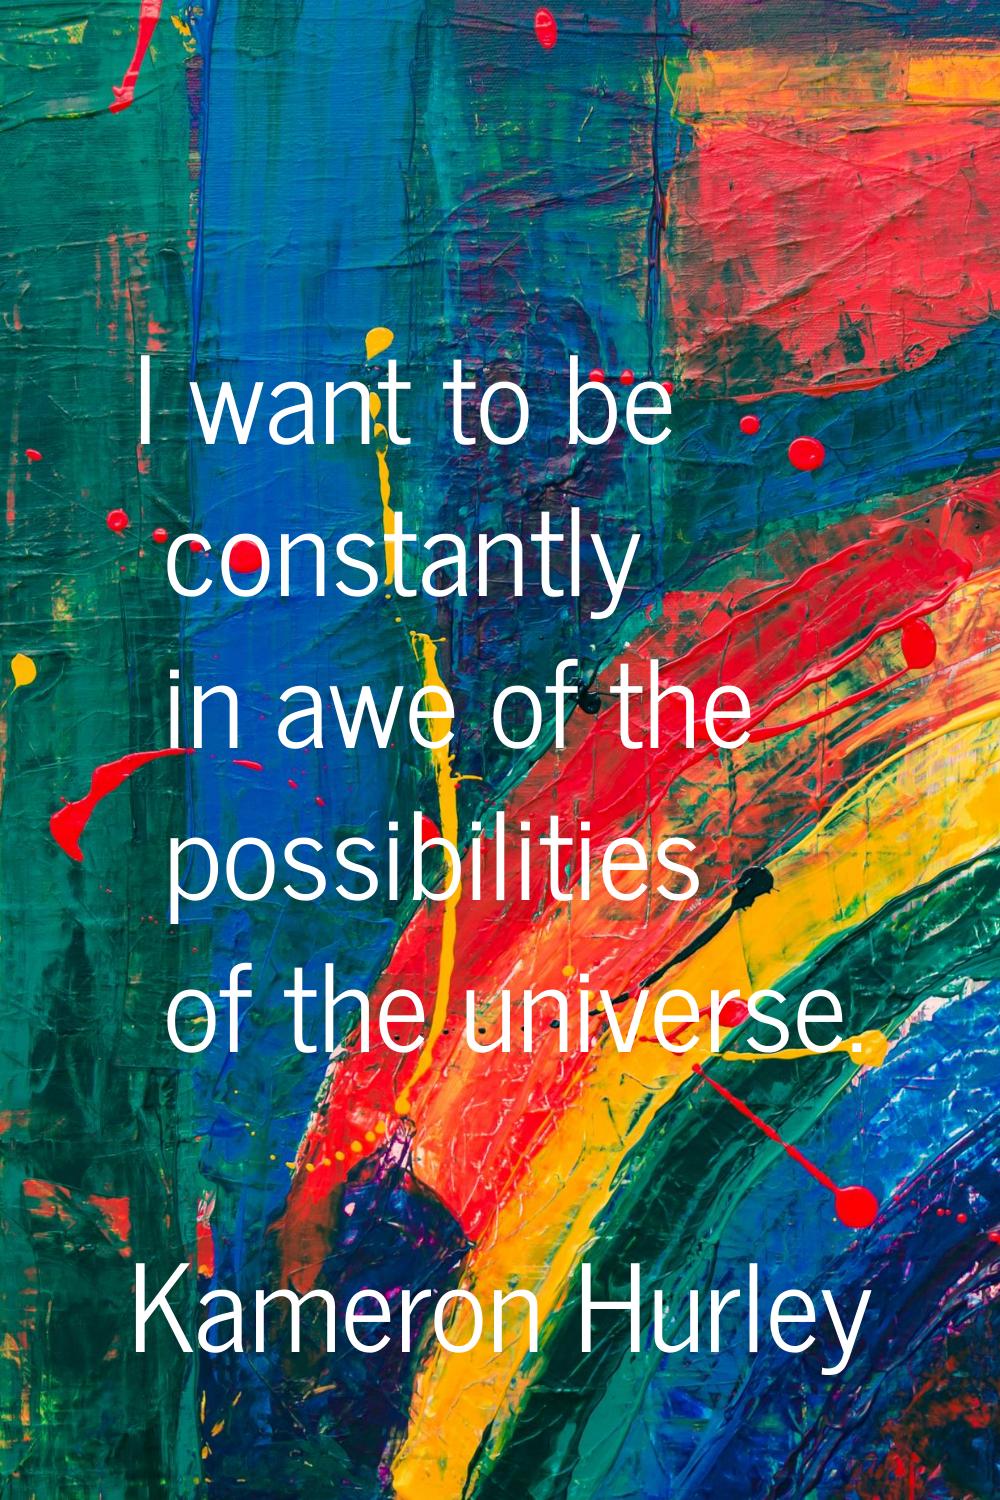 I want to be constantly in awe of the possibilities of the universe.